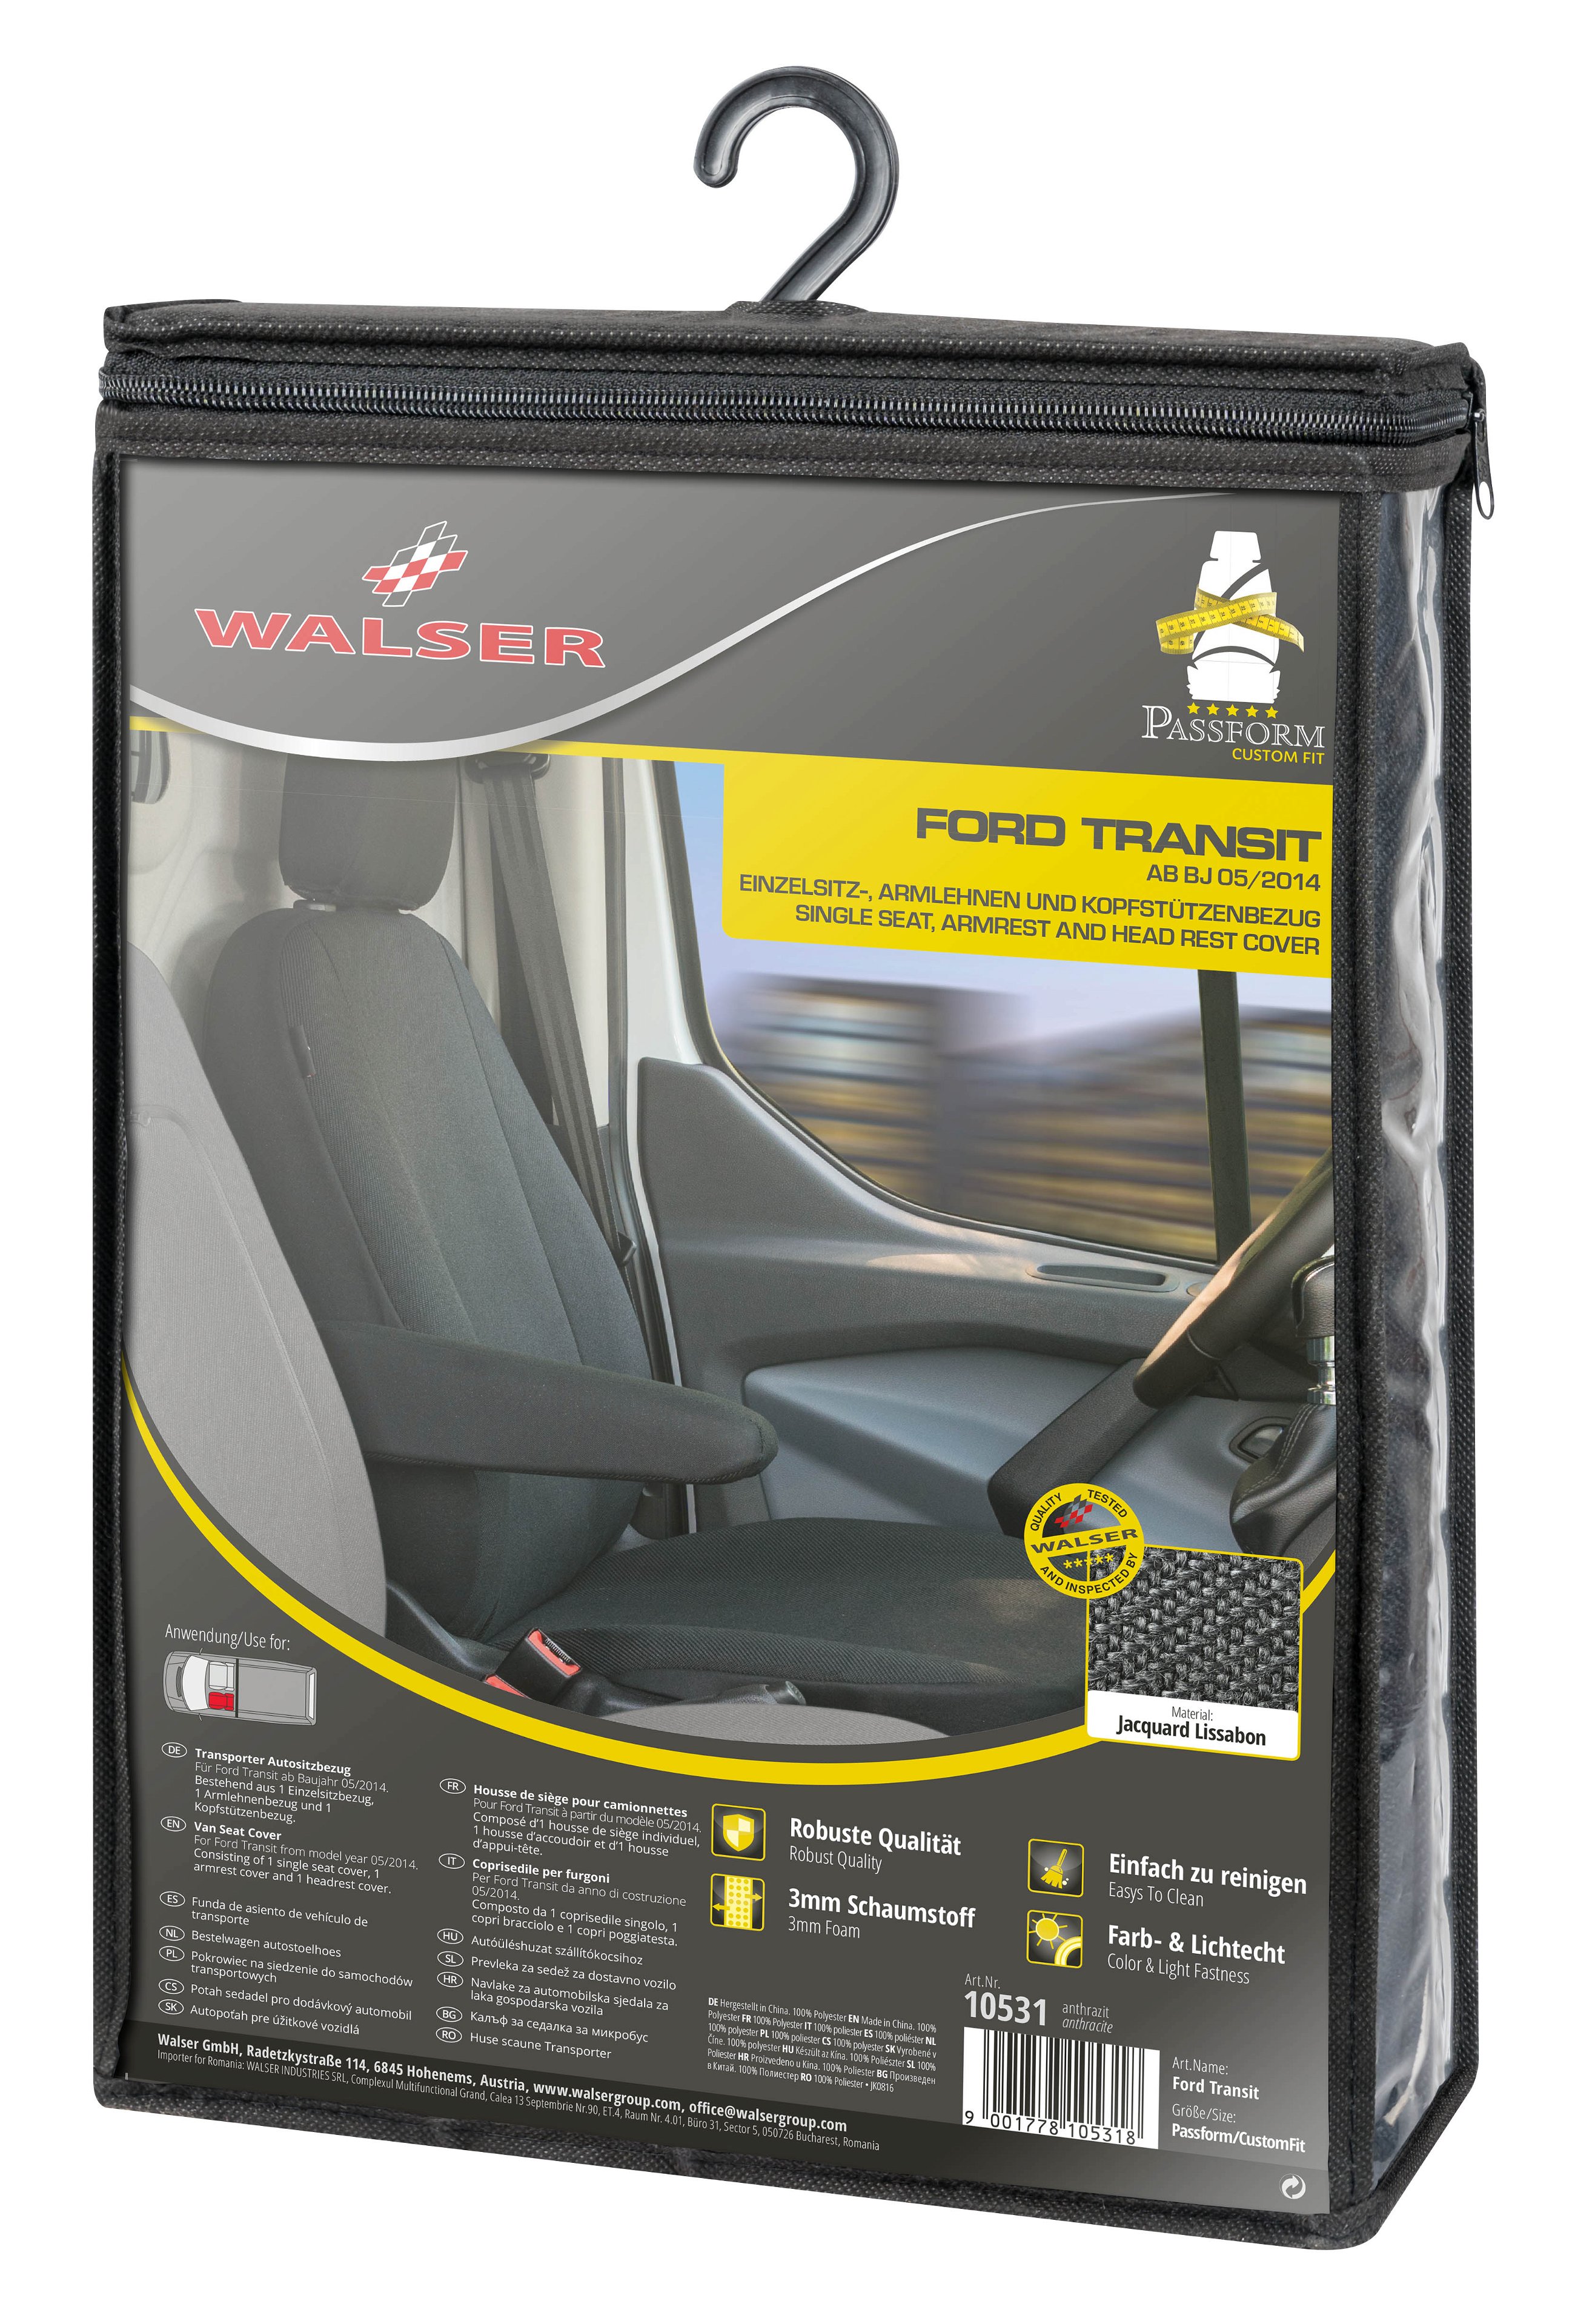 Seat cover made of fabric for Ford Transit, single seat cover front